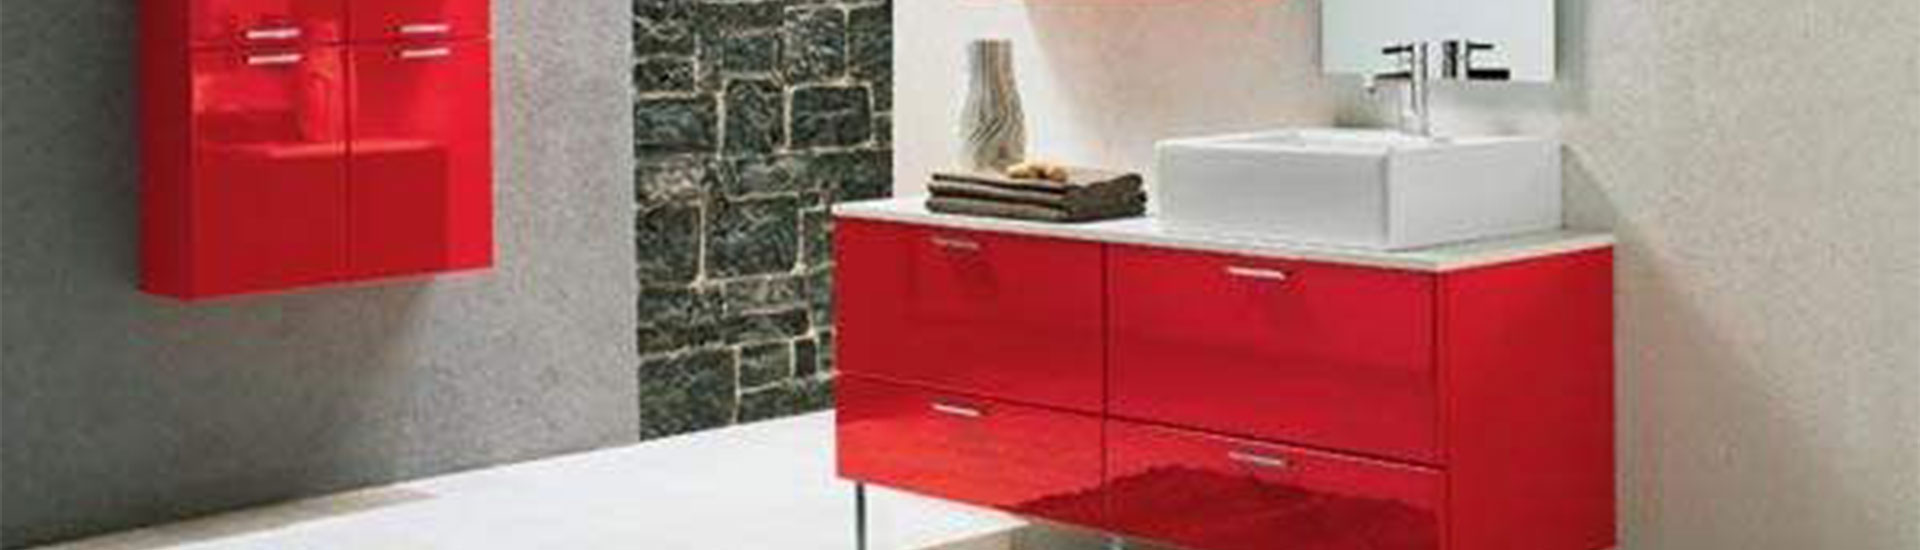 Red Bathroom Cabinet Wraps